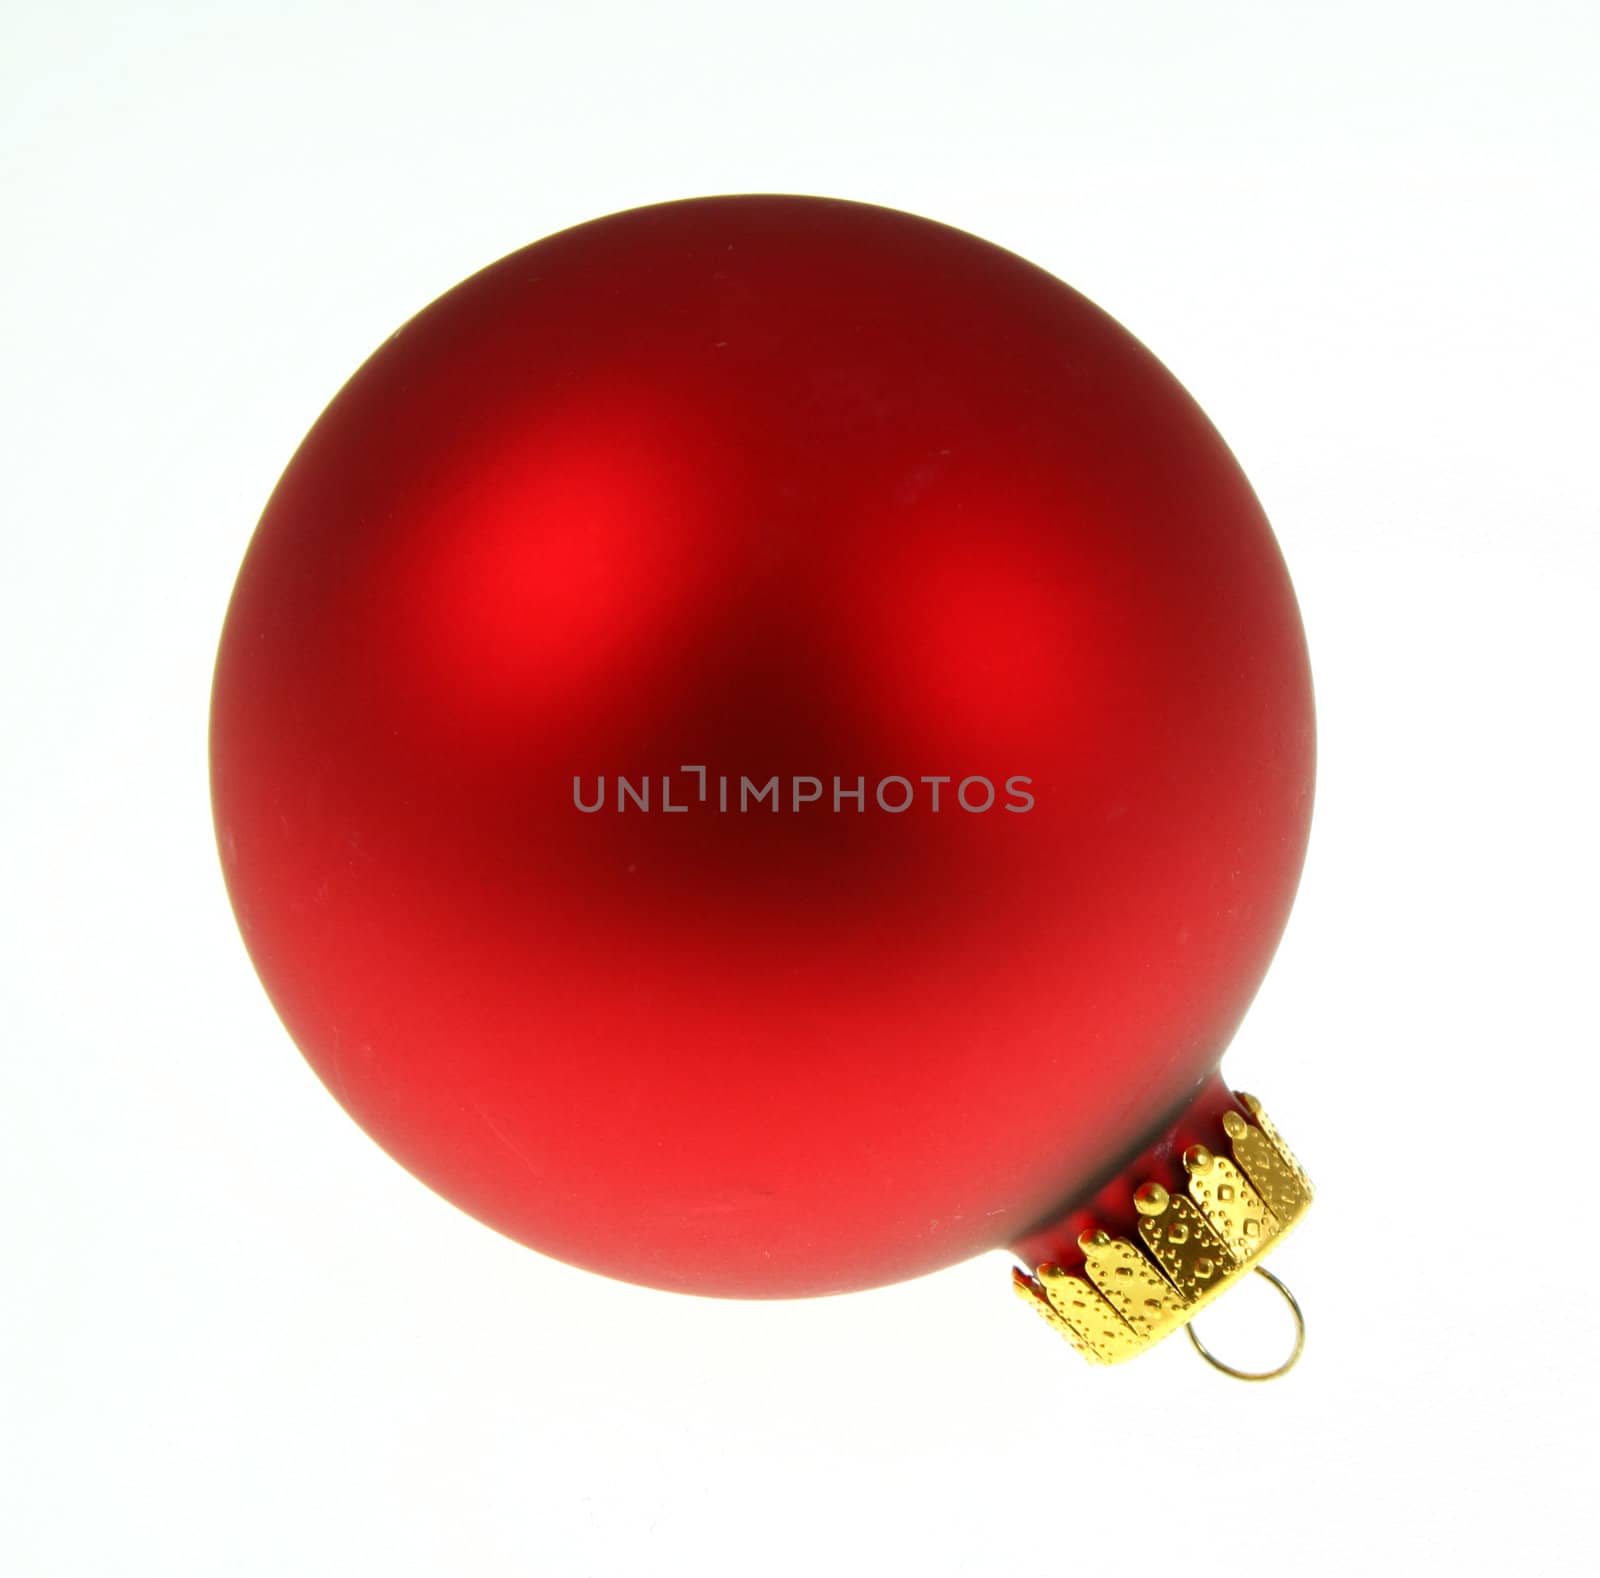 A single isolated red Christmas sitting bauble.
